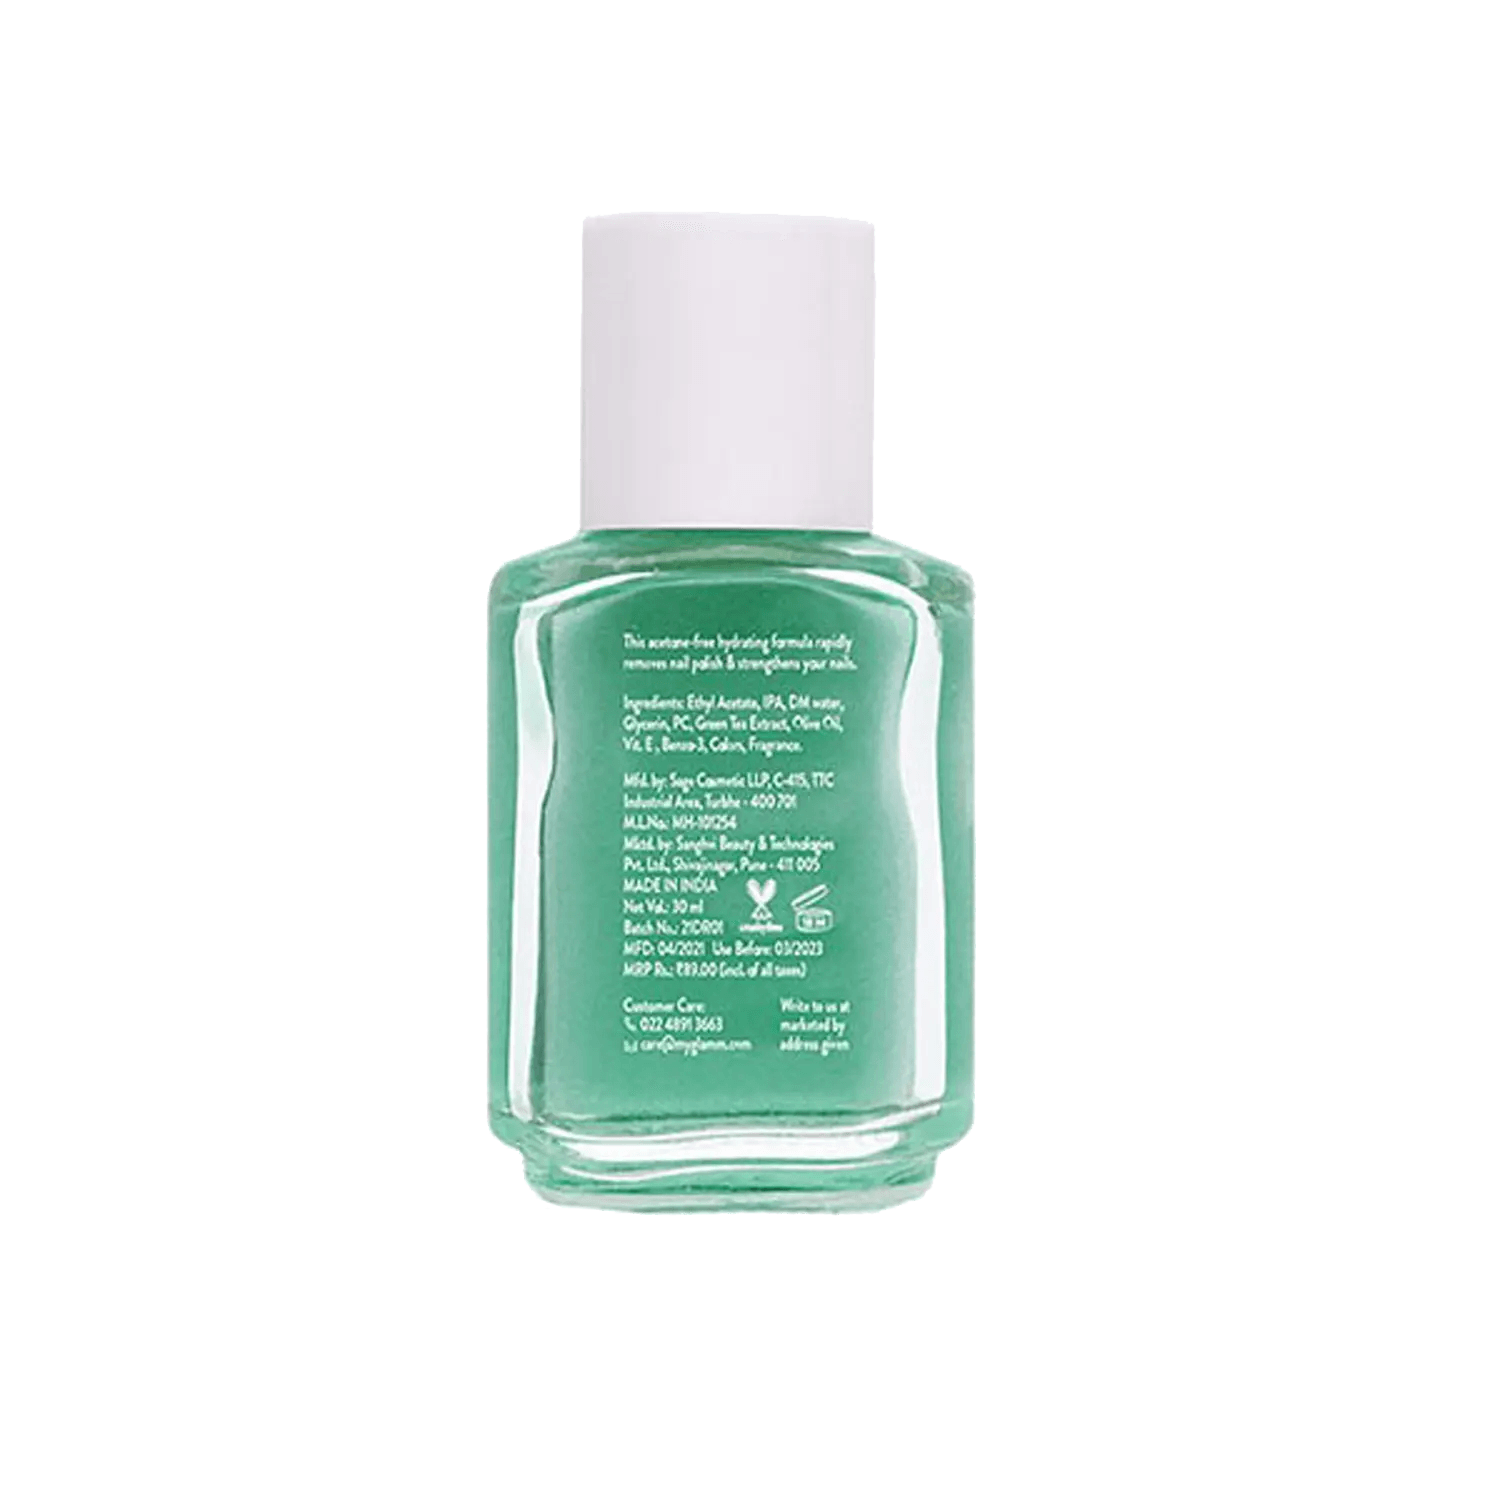 The Little Canvas: Glitter Nail Polish Remover Gel Review